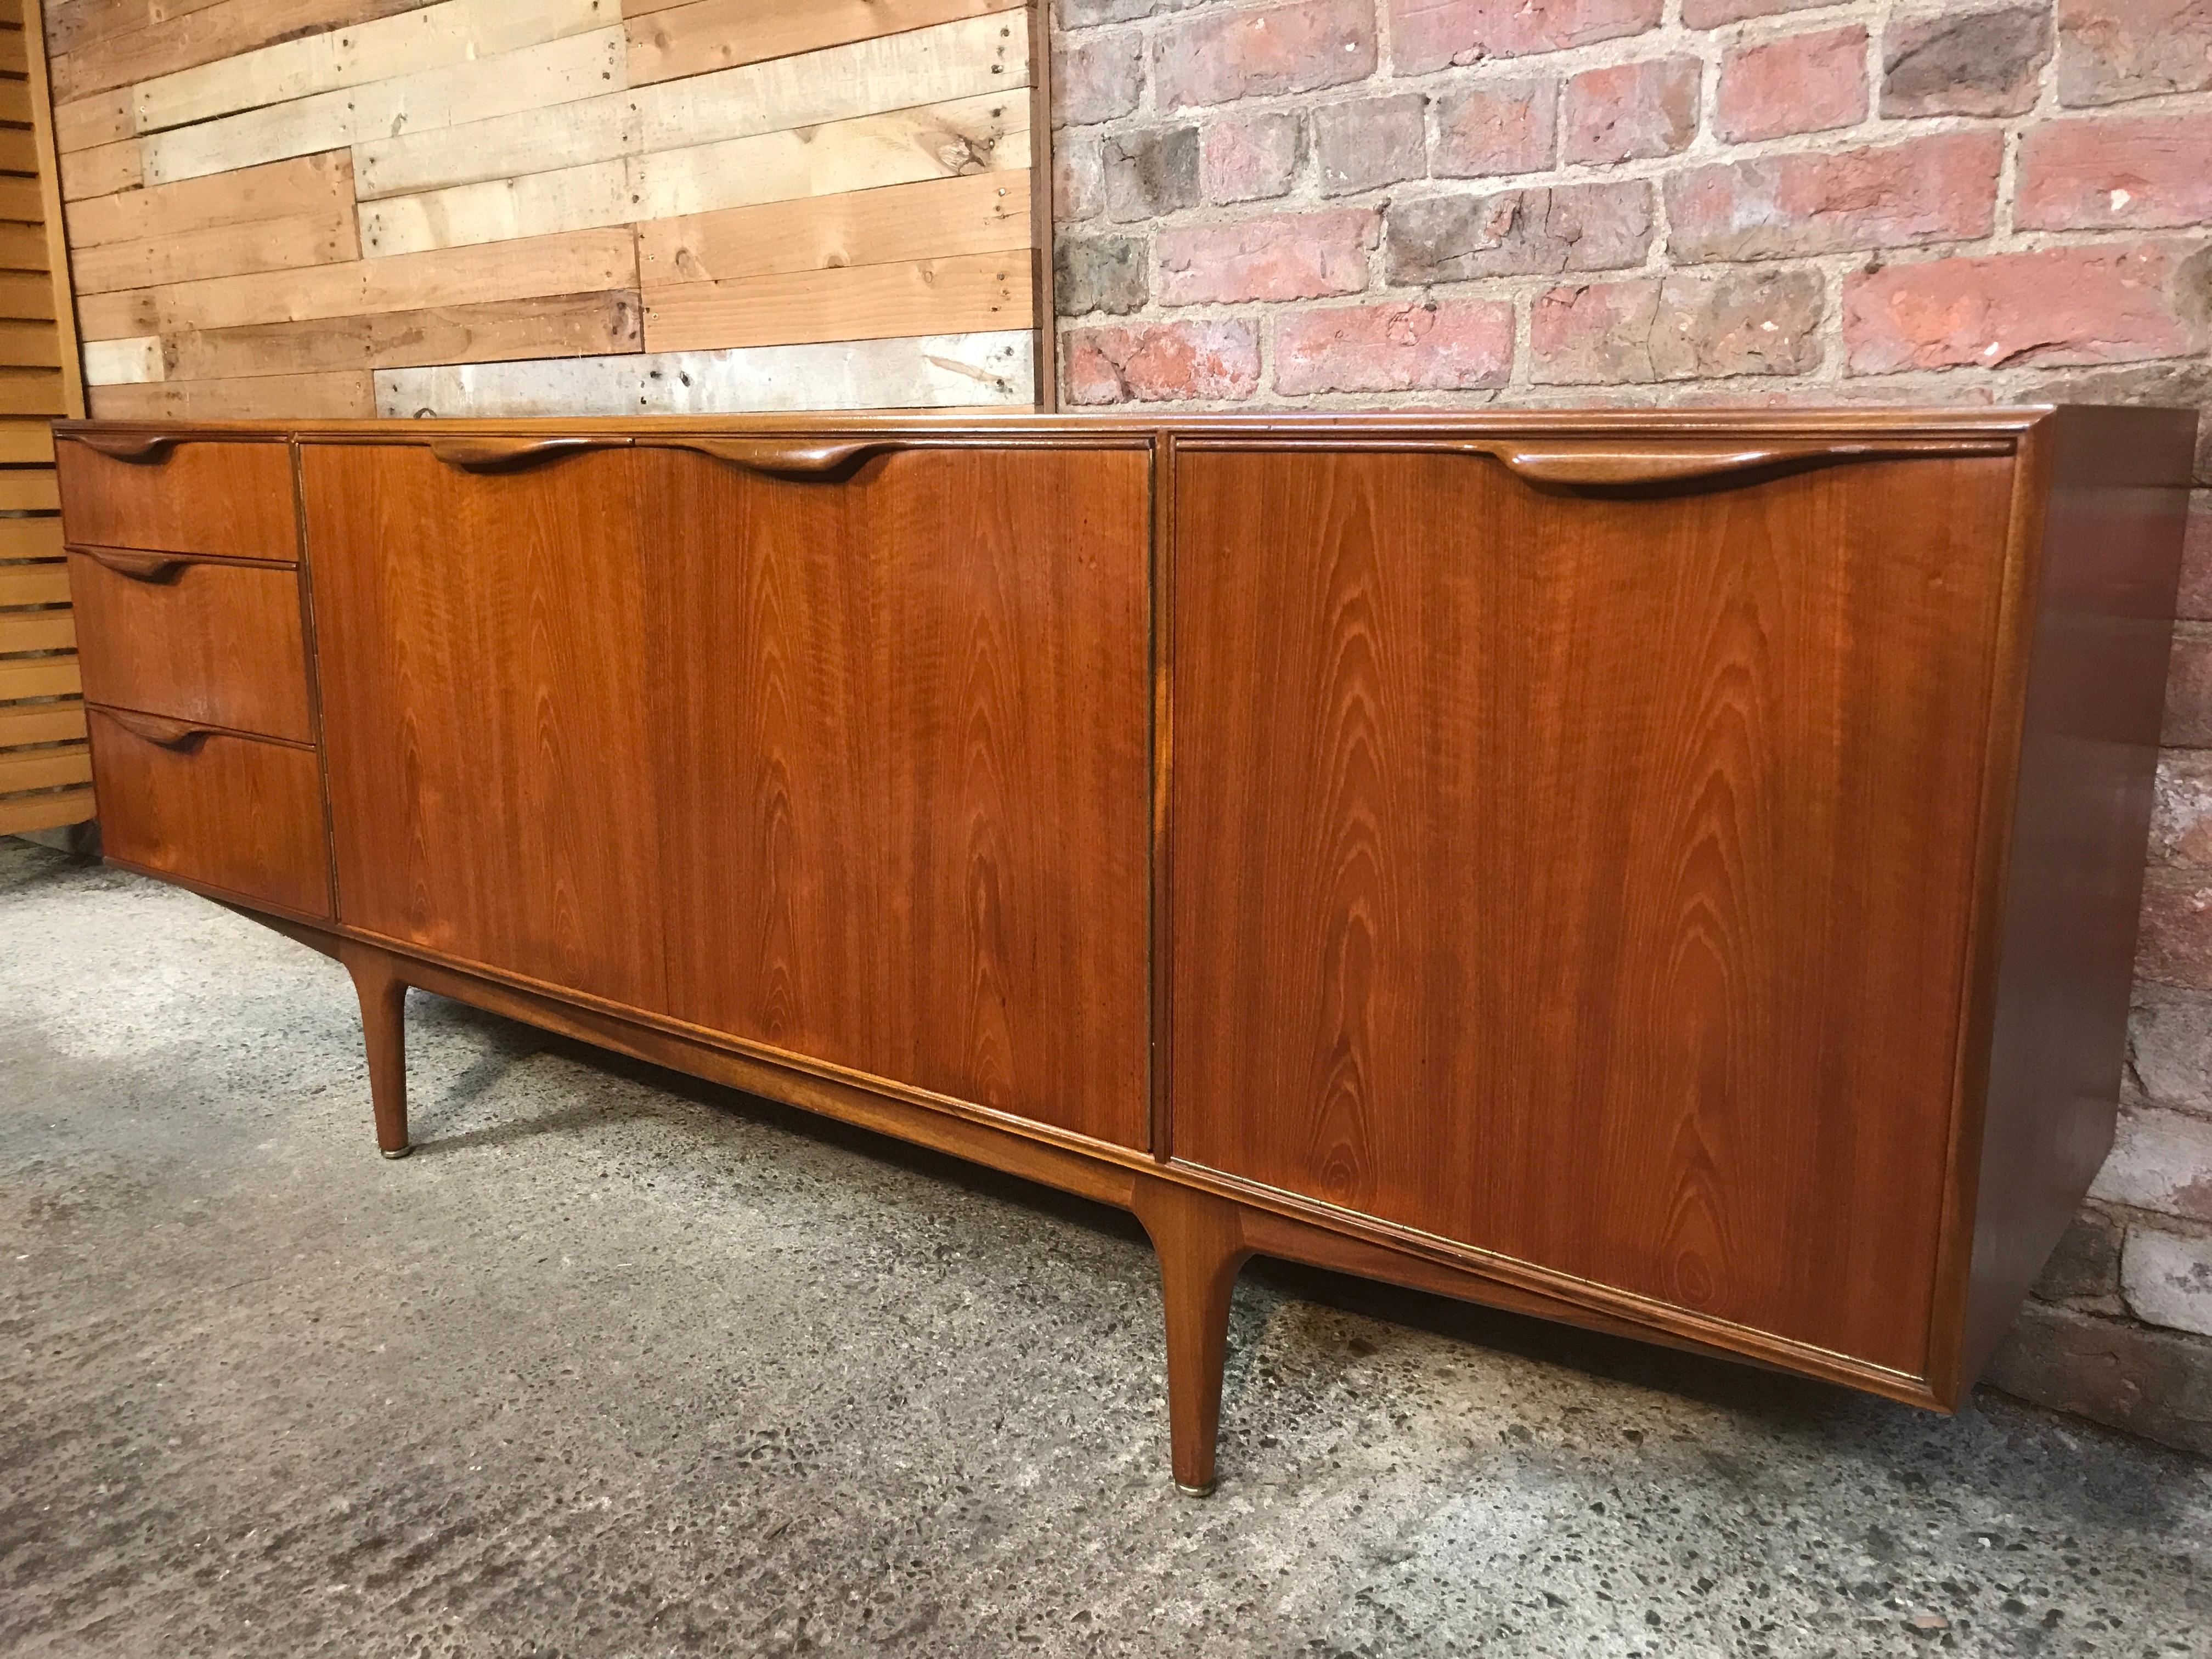 Vintage 1960s McIntosh sideboard by Tom Robertson. It has three drawers, cupboard space, and a drinks section with a useful pullout shelf. Credenza is in very good original condition.